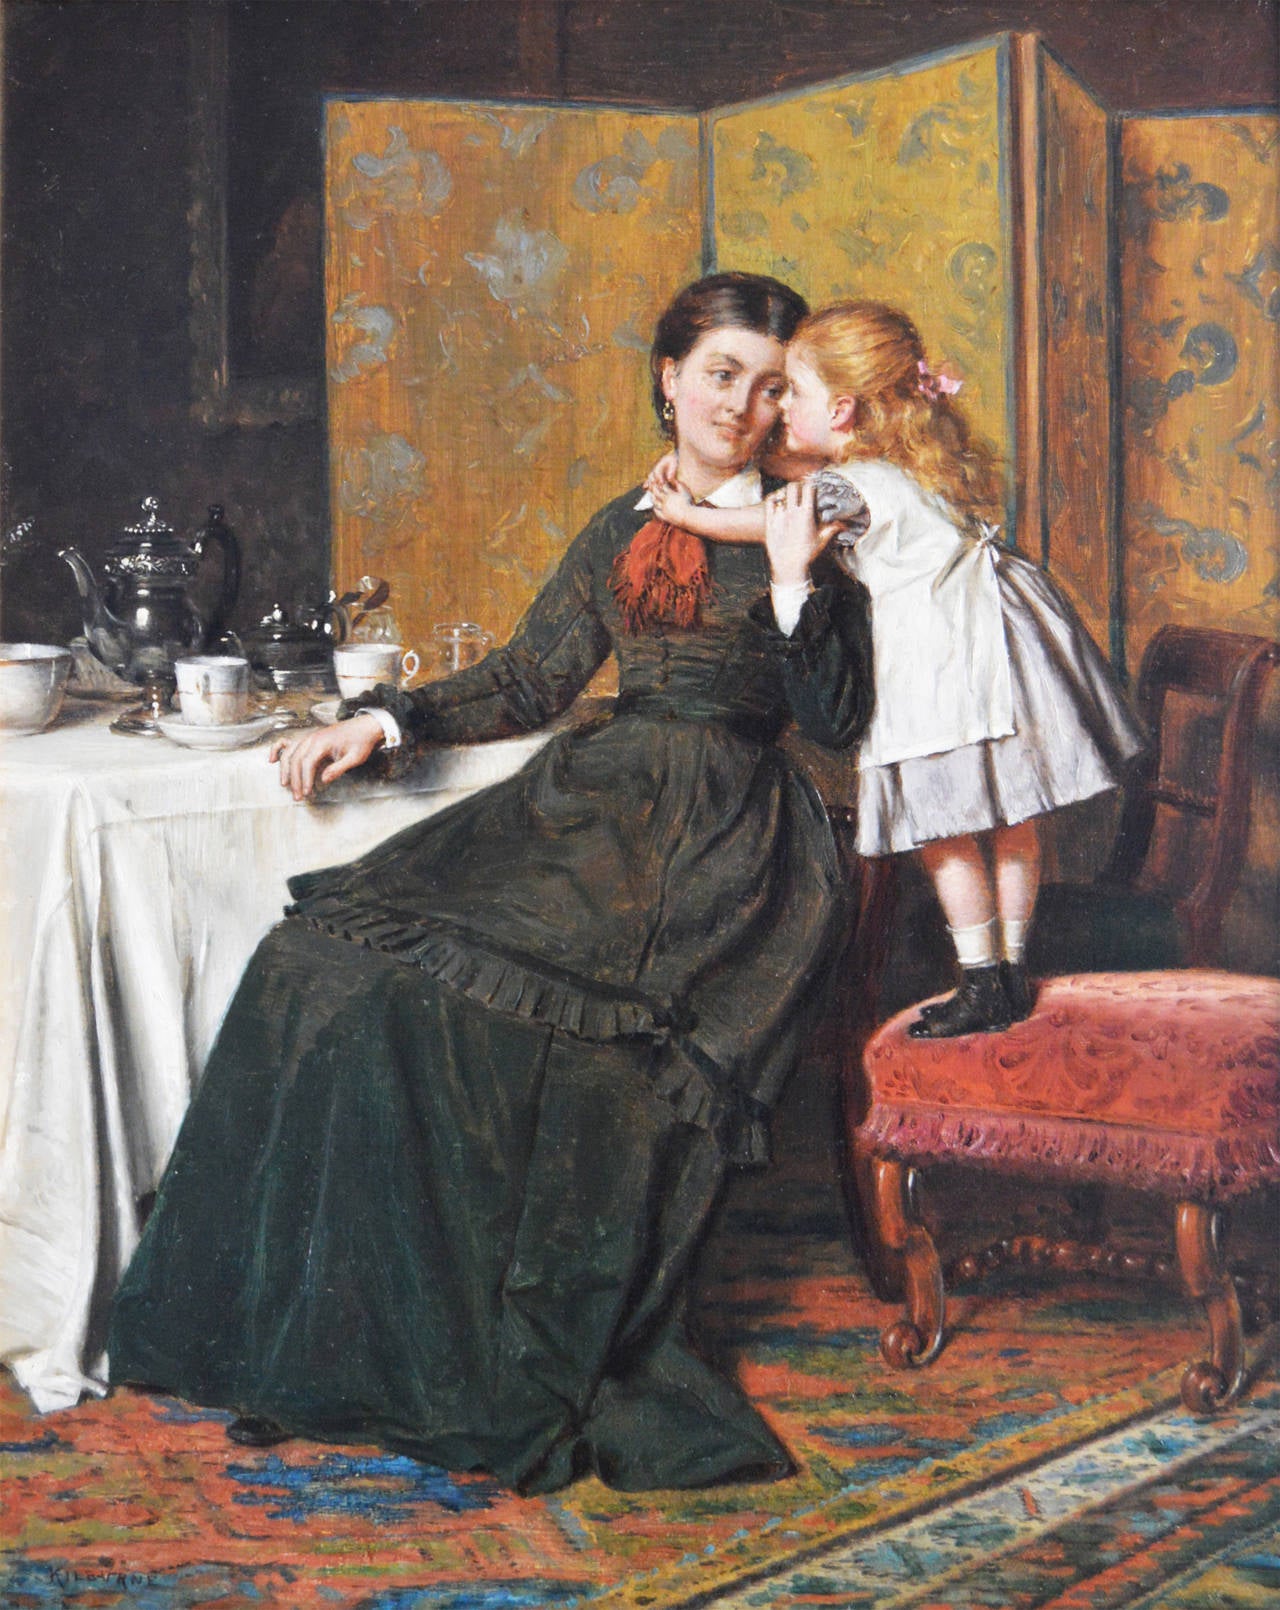 George Goodwin Kilburne
British, (1839-1924).
A Tender Moment
oil on canvas, signed.
Image size: 15¾ inches x 12¾ inches.
Size including frame: 20½ inches x 17½ inches.

George Goodwin Kilburne was a genre painter both in oil and watercolor